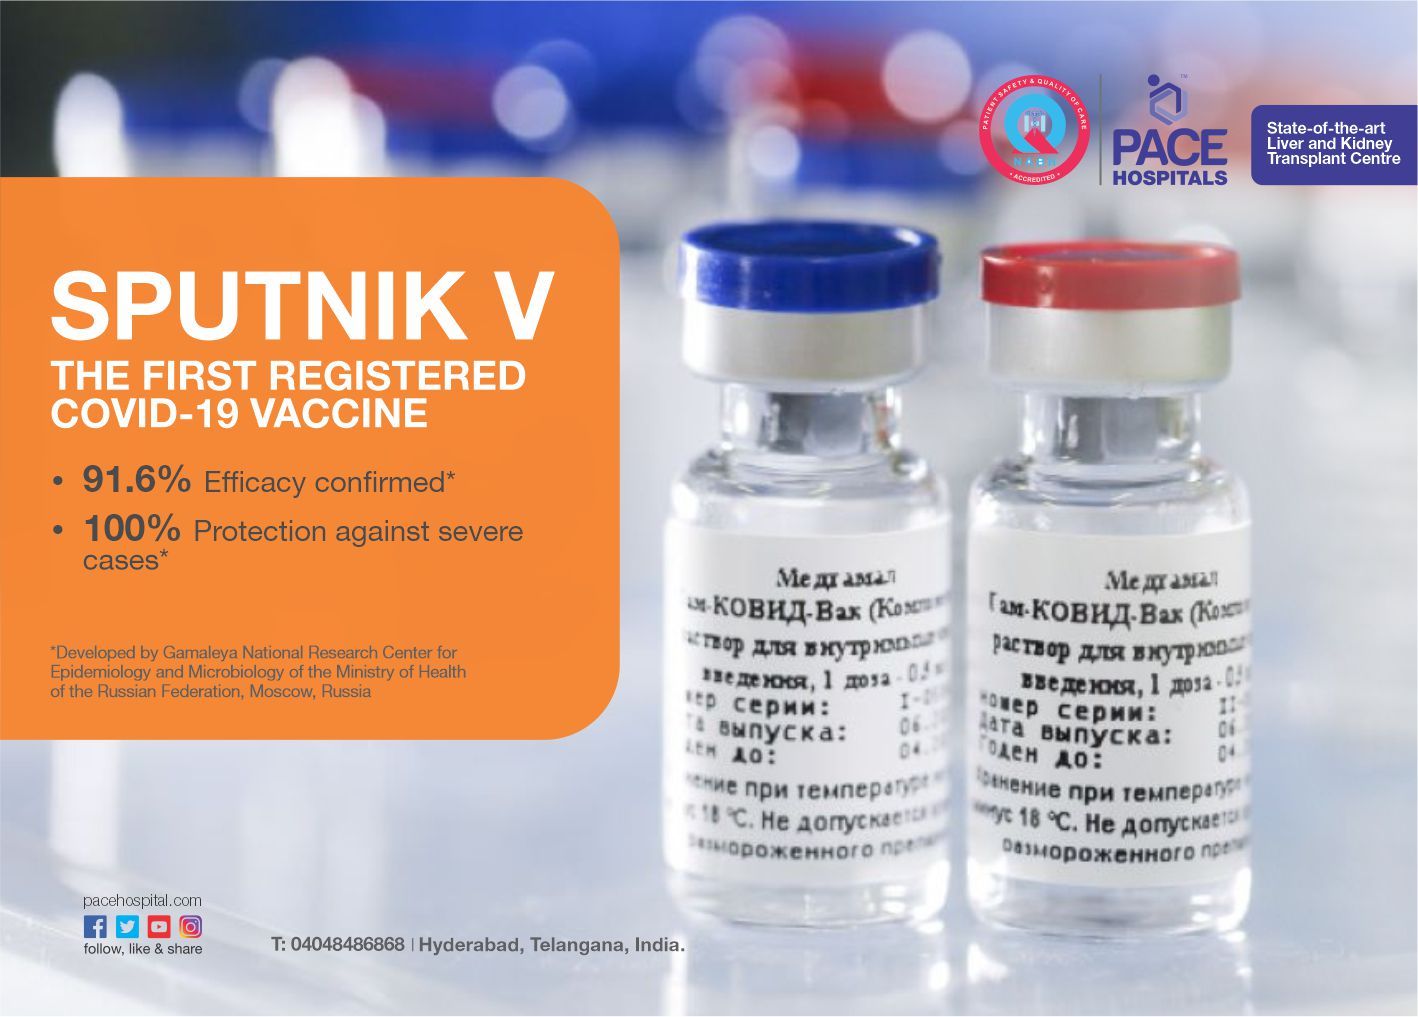 The Sputnik V vaccine in India - Pace Hospitals, Hyderabad